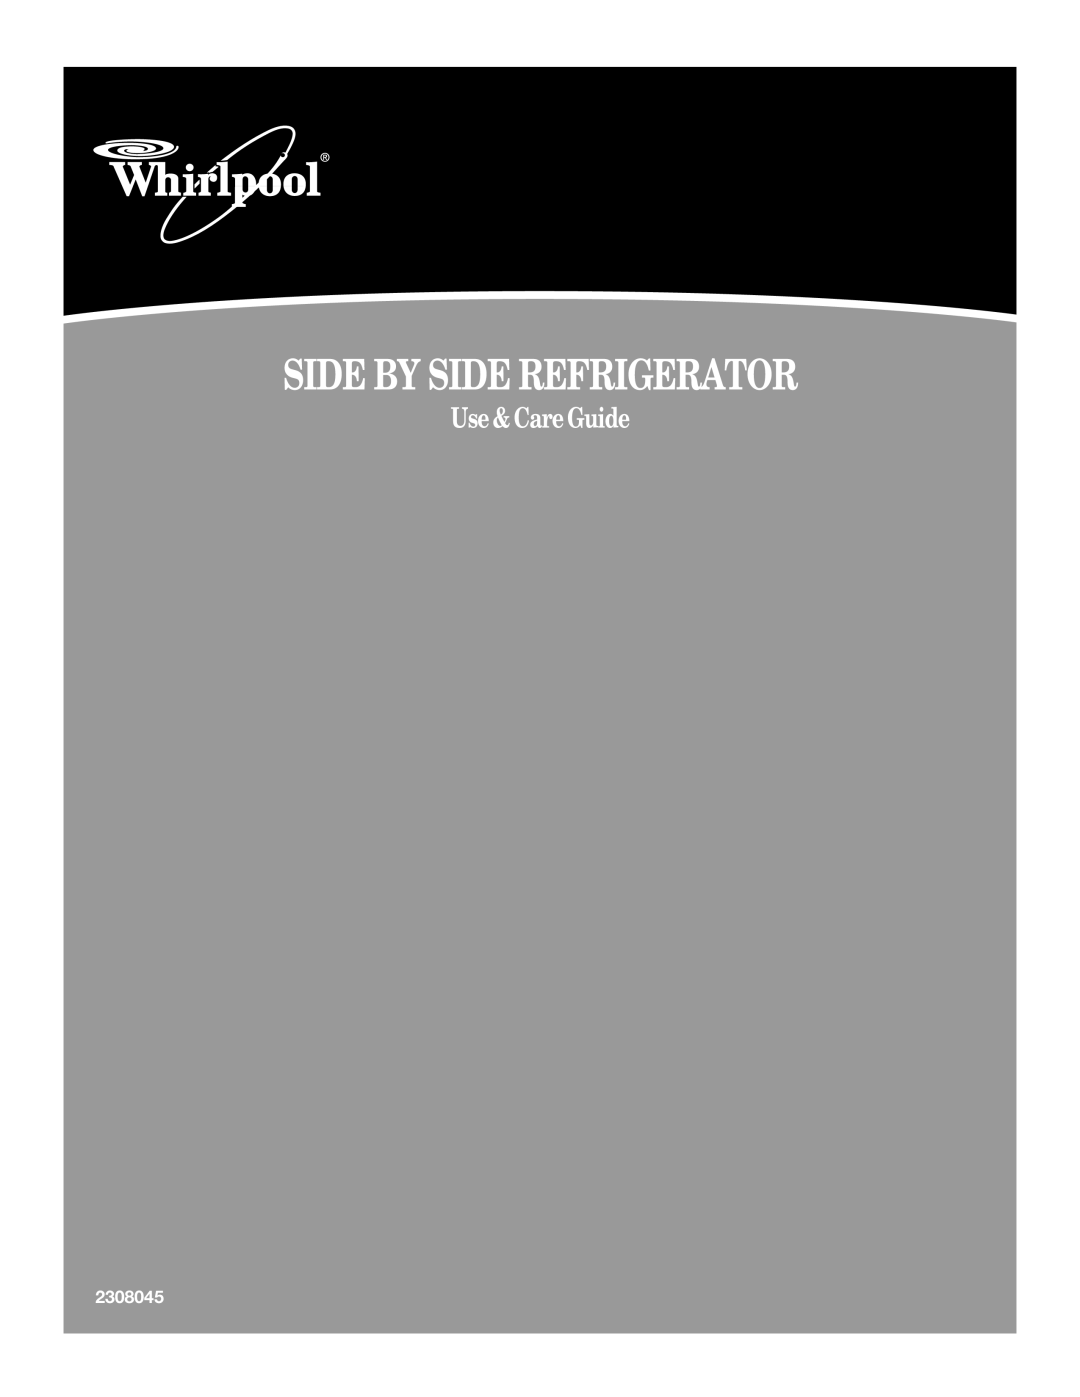 Whirlpool 2308045 manual Side By Side Refrigerator, Use & Care Guide 